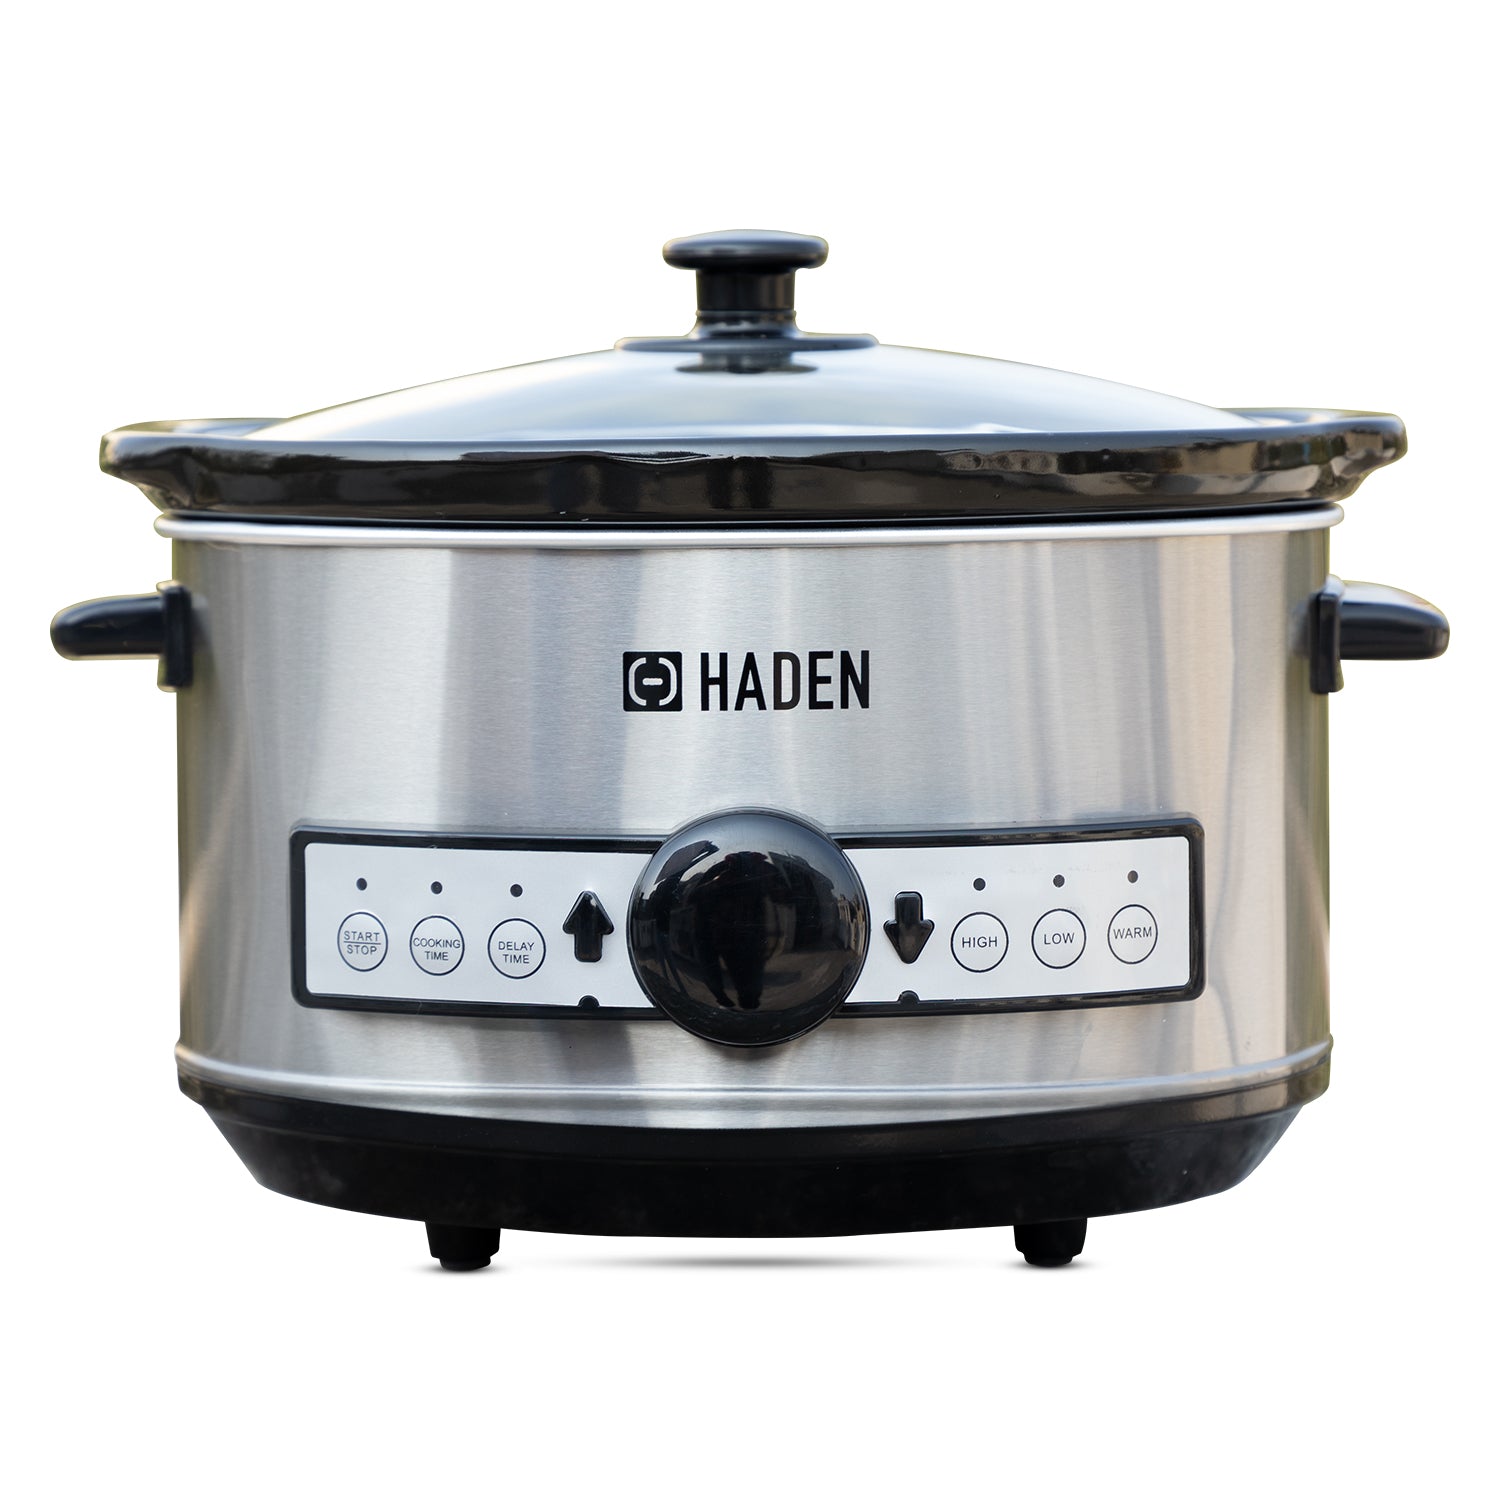 Digital Slow Cooker with Timer | 3.5 litres | 3 Settings, Warm, Low and High |